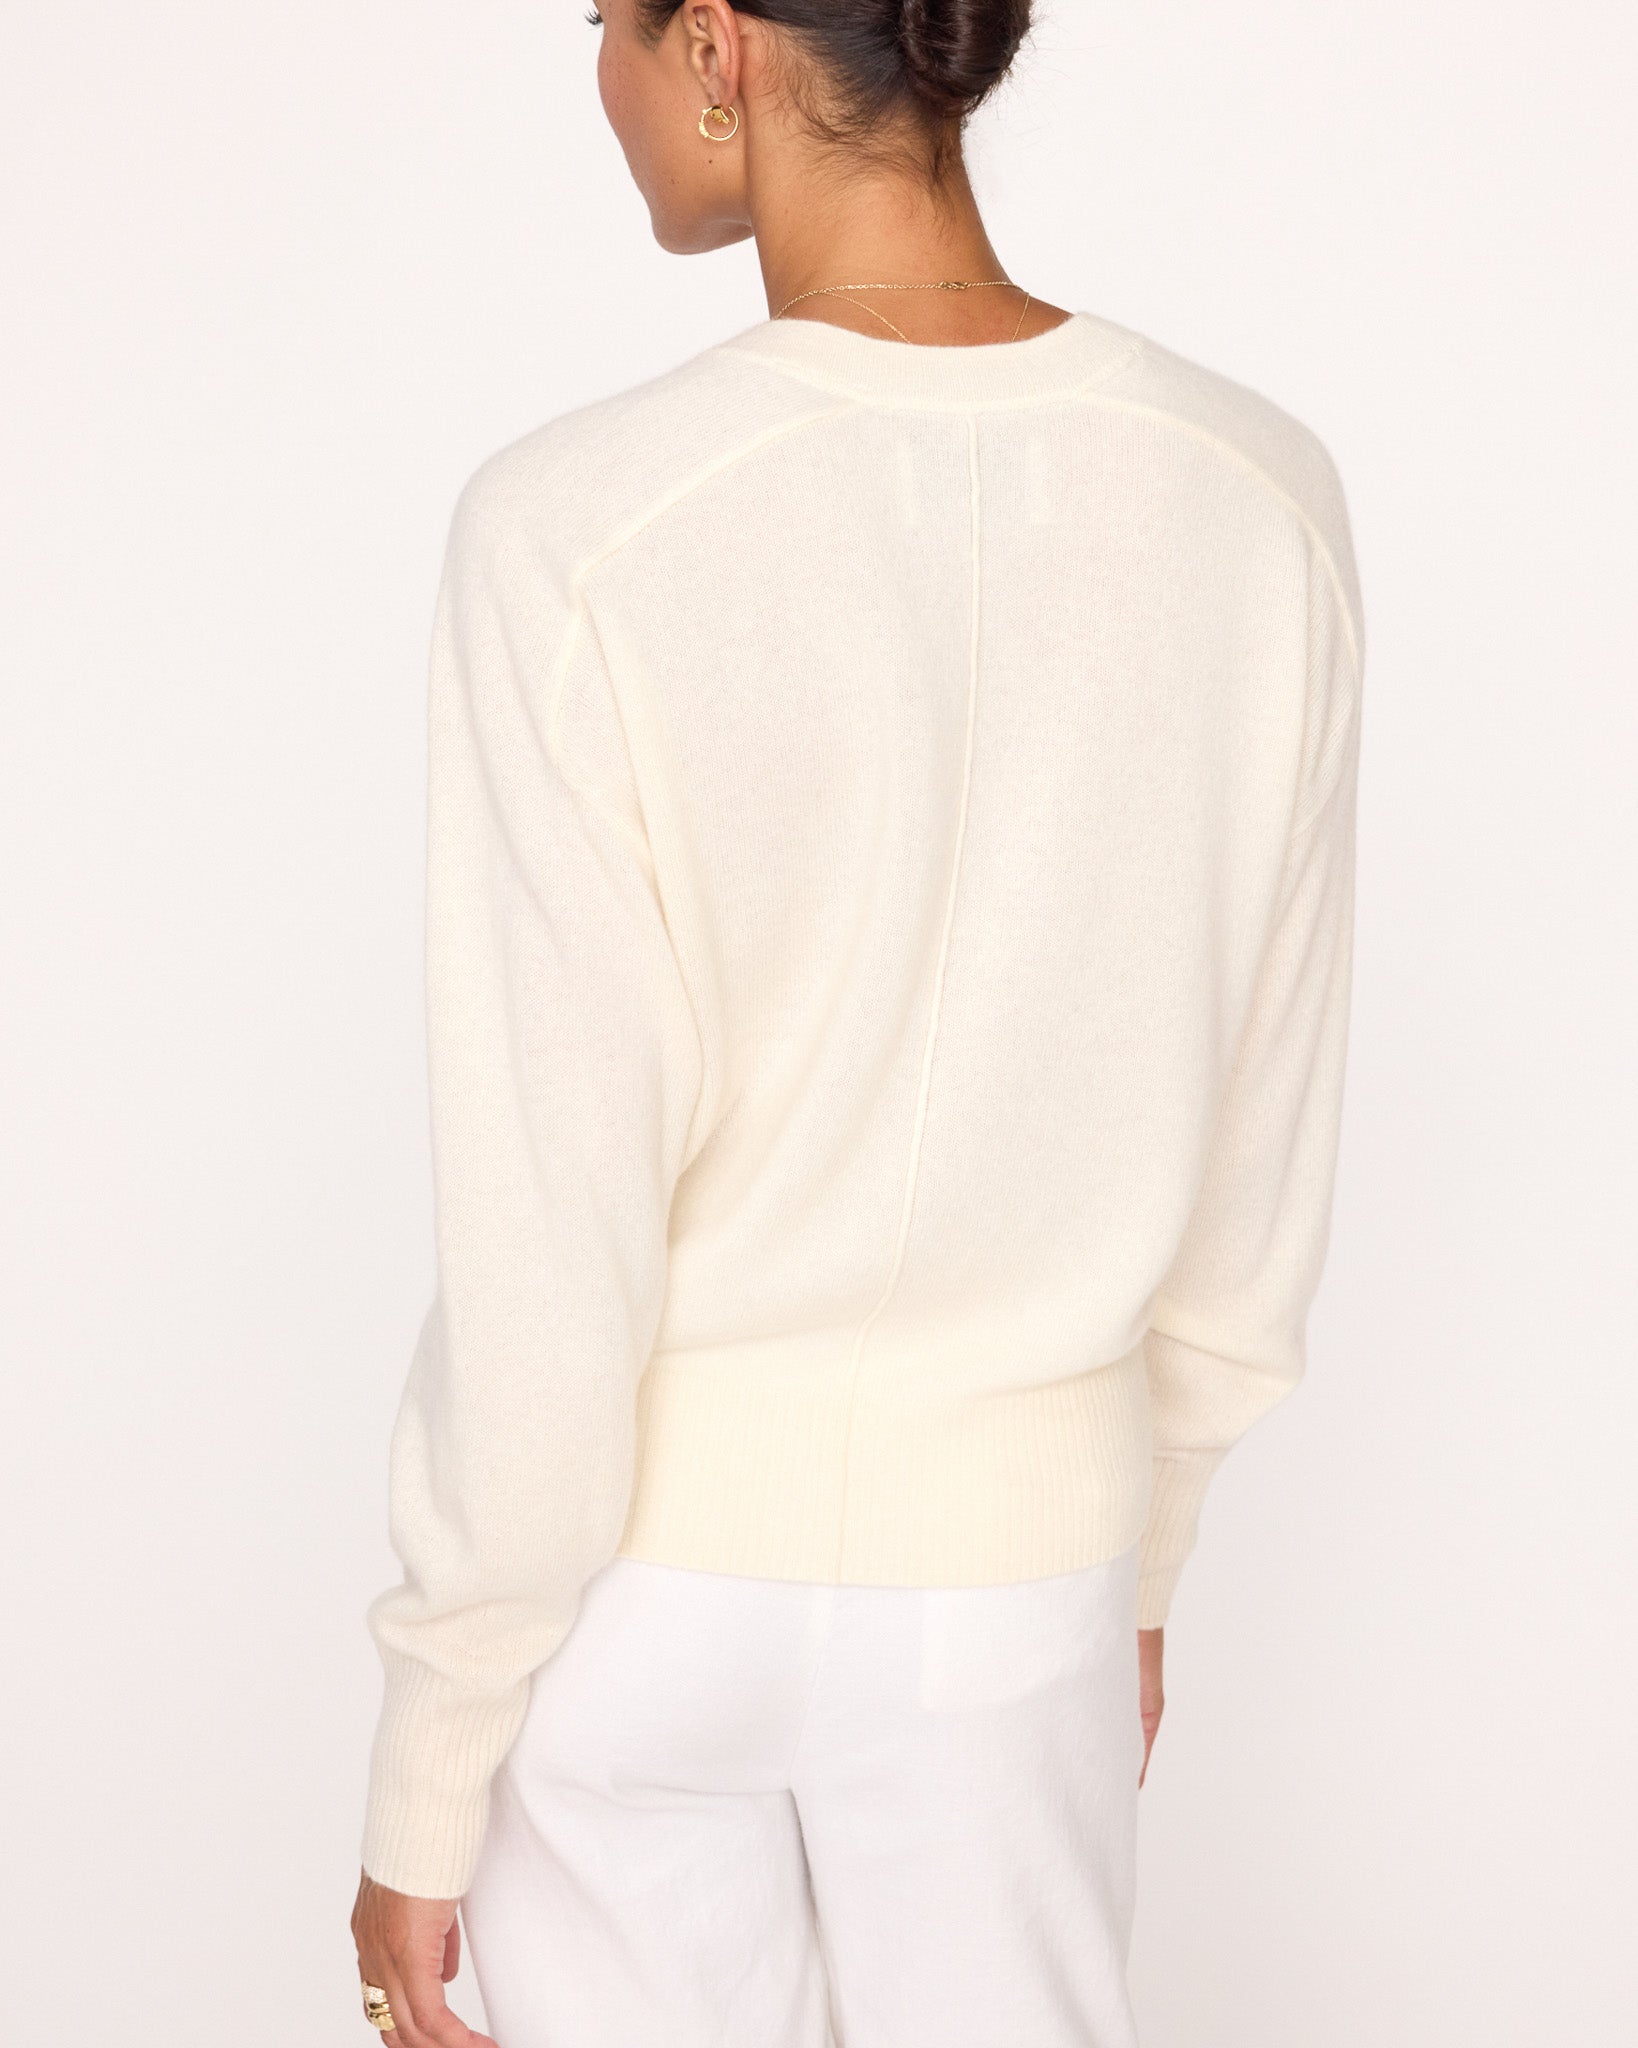 Leia V-neck beige sweater back view 